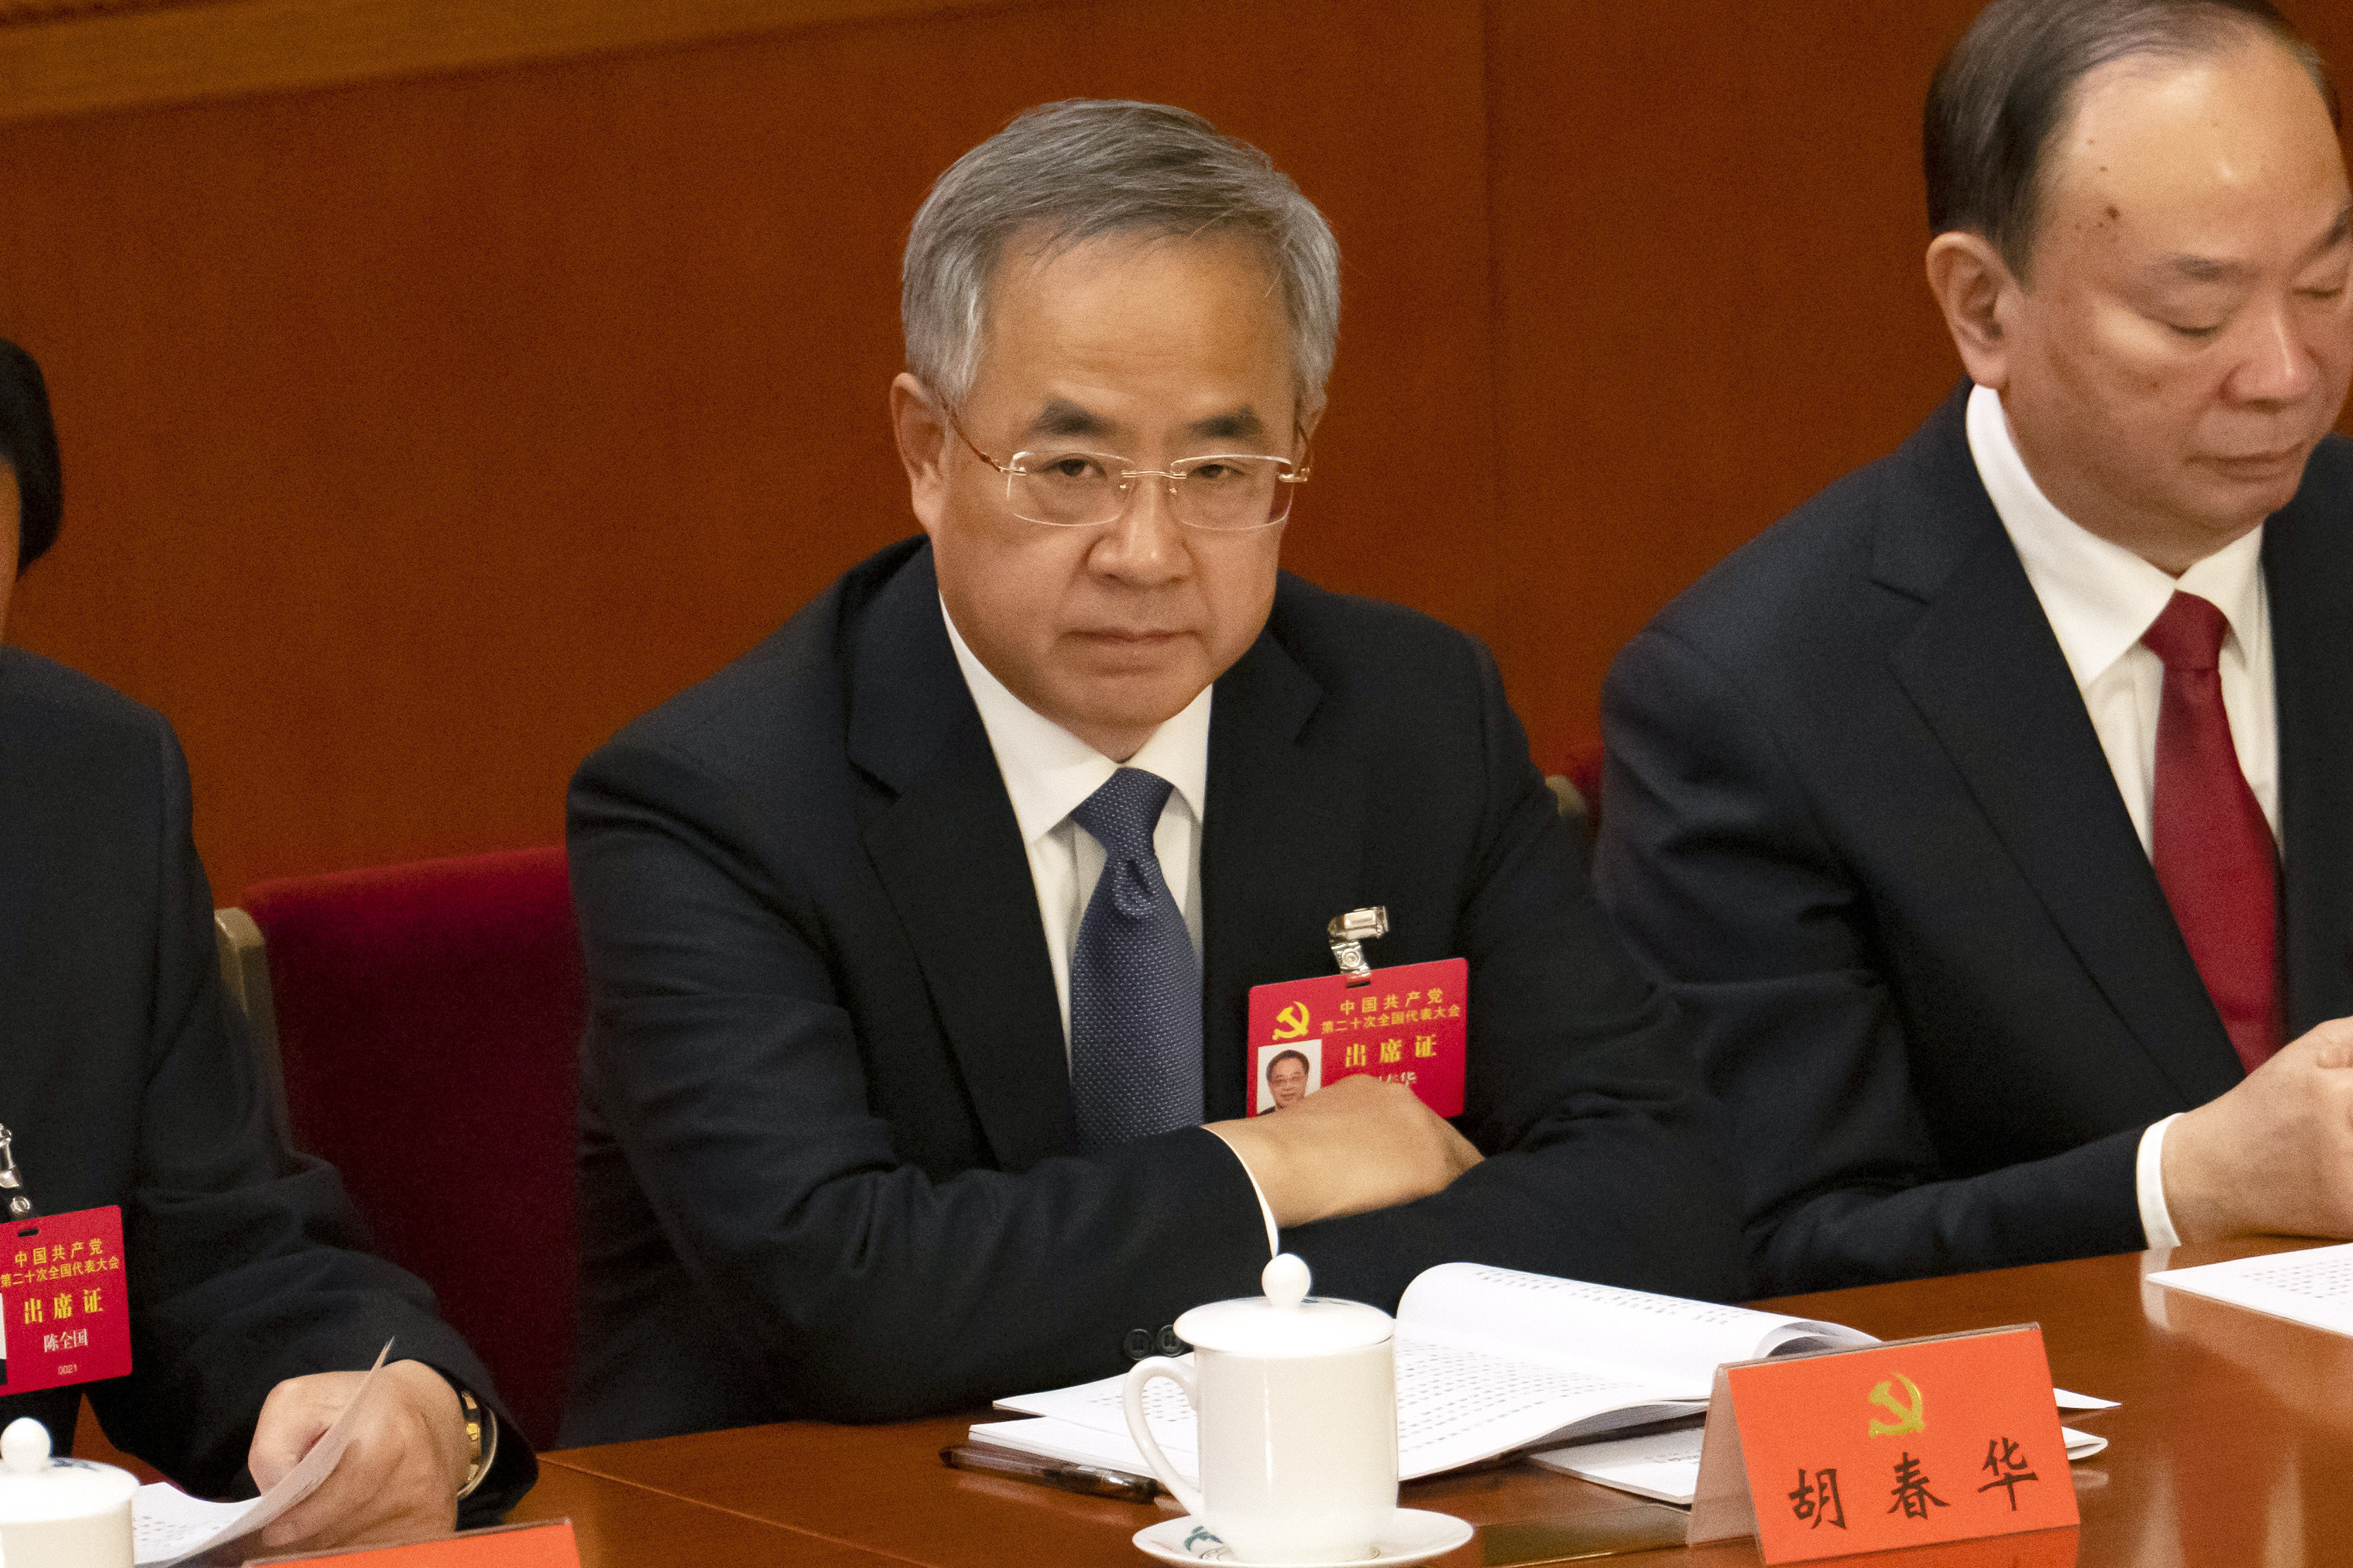 Vice-Premier Hu Chunhua has been called “Little Hu” because his career path resembles that of former Chinese president Hu Jintao. Photo: AP